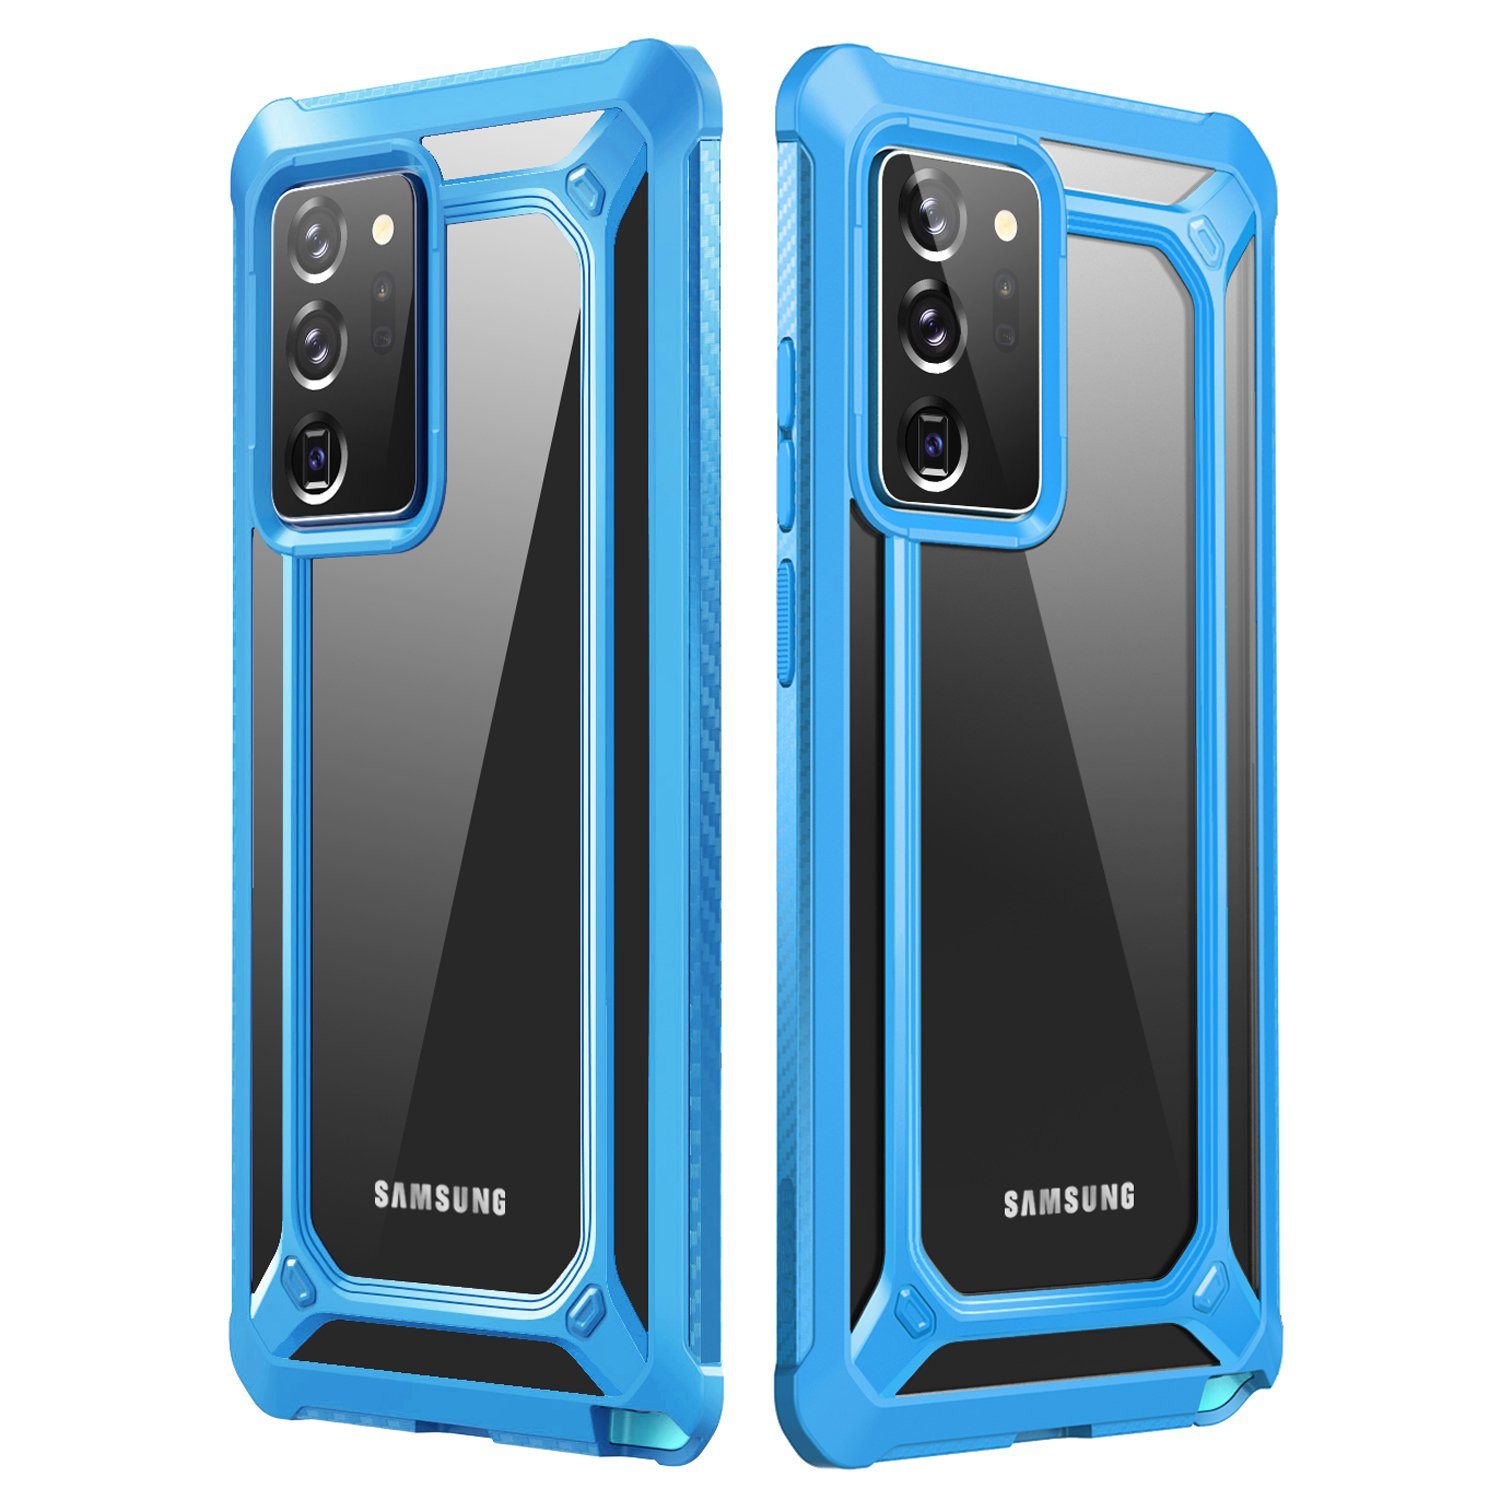 Supcase UB Exo Series for Samsung Galaxy Note 20 Ultra(Without Screen Protector), Blue Default supcase 